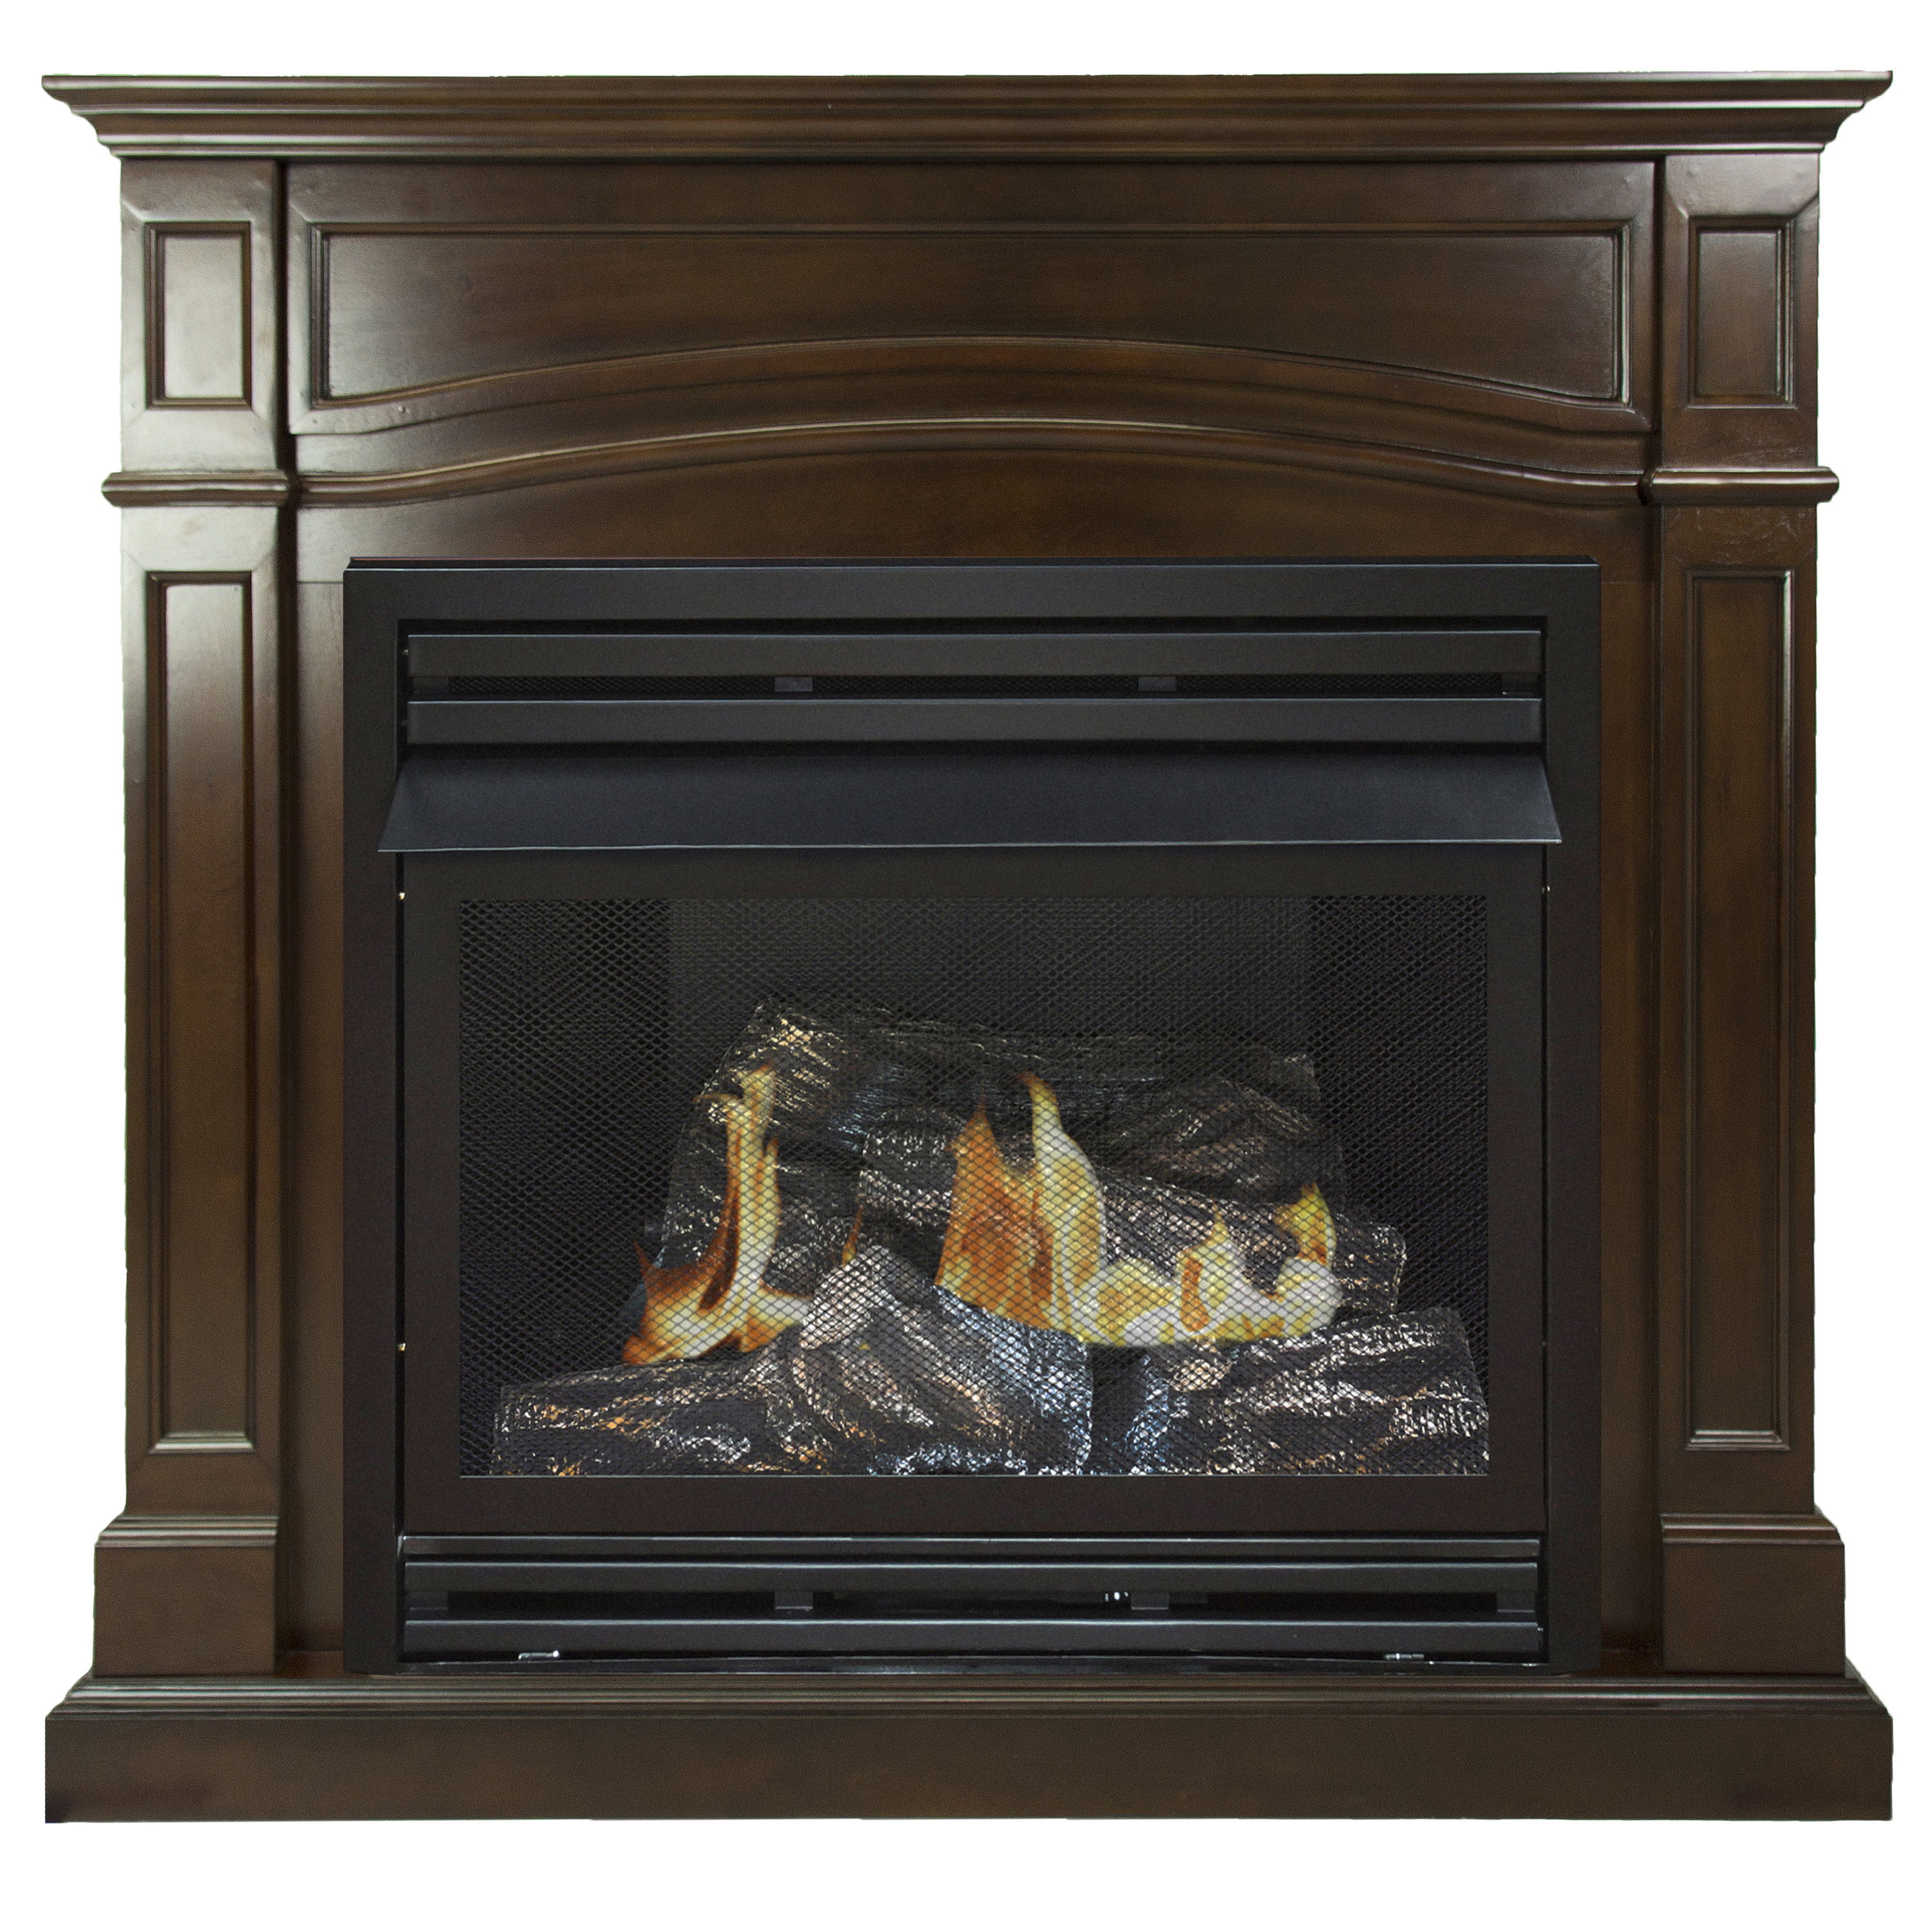 Pleasant Hearth 46 in. Liquid Propane Large Freestanding Cherry Vent Free Fireplace 32,000 BTU - image 3 of 8